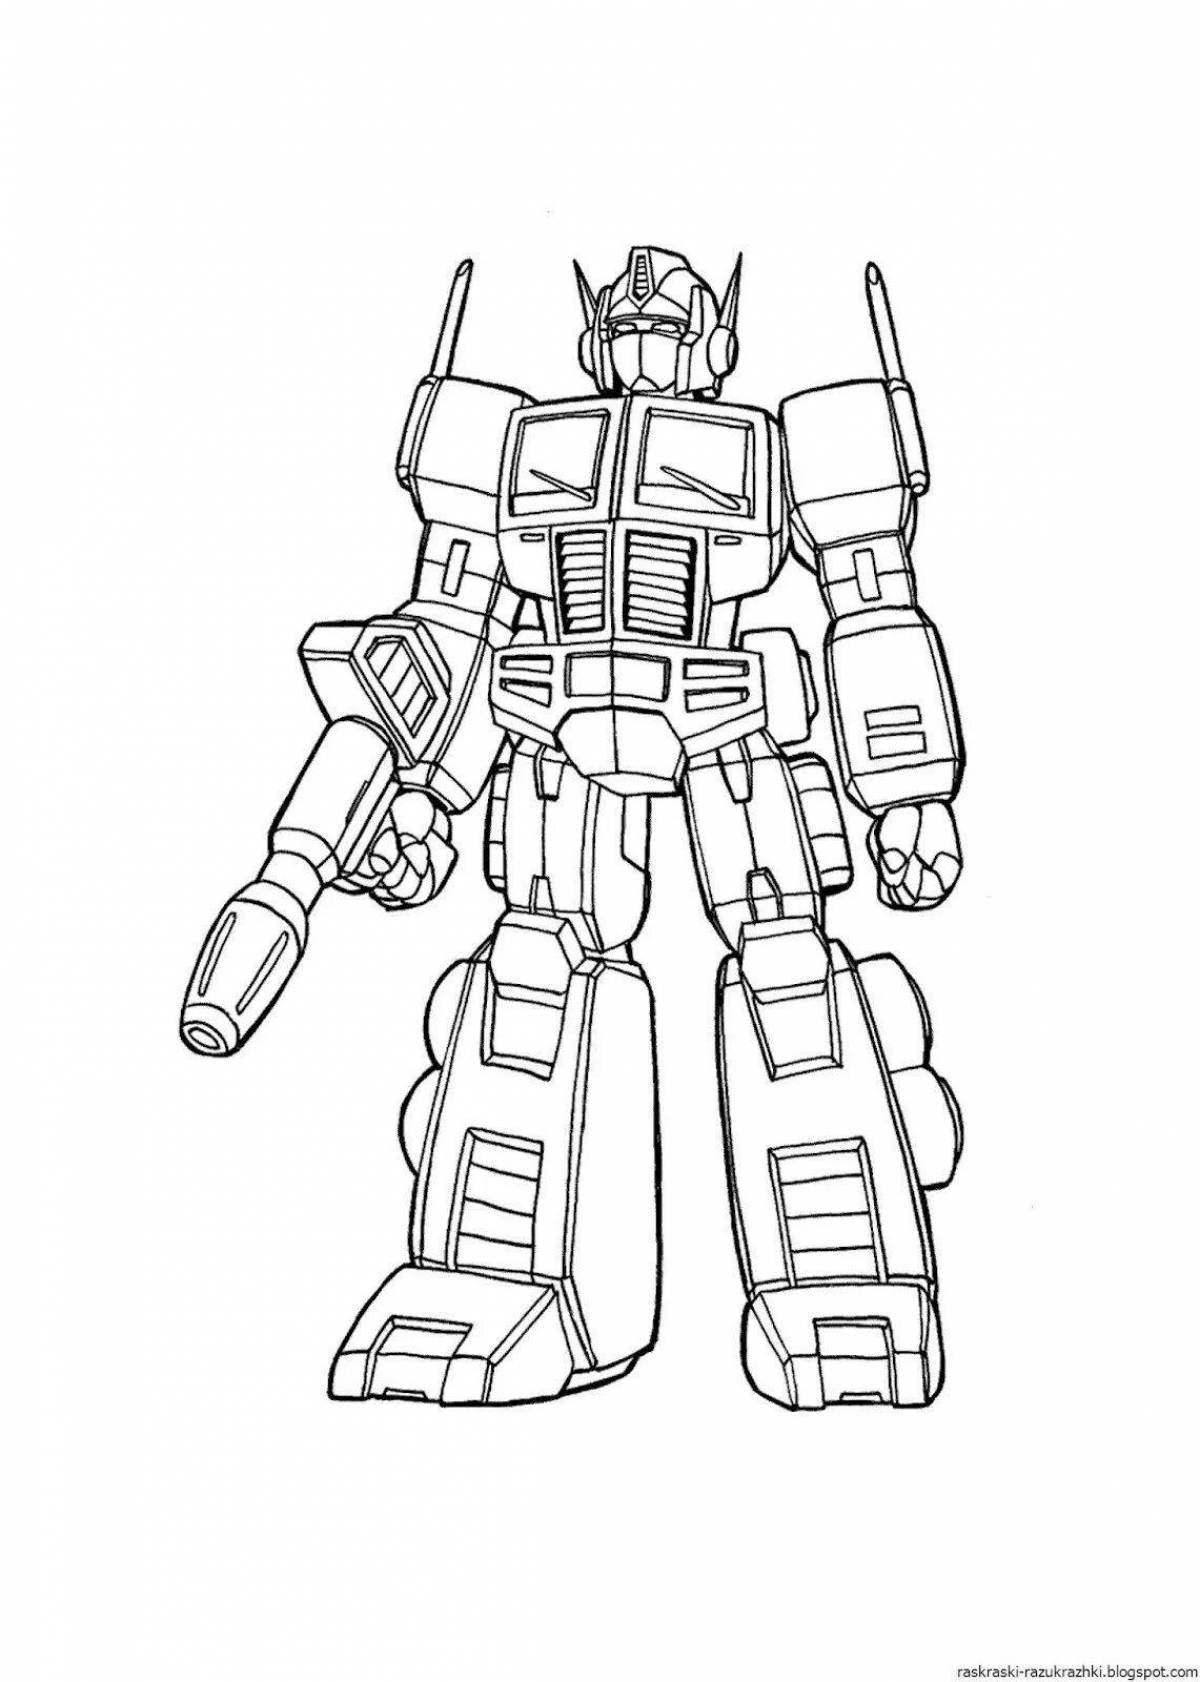 Awesome transformers coloring pages for 6-7 year olds